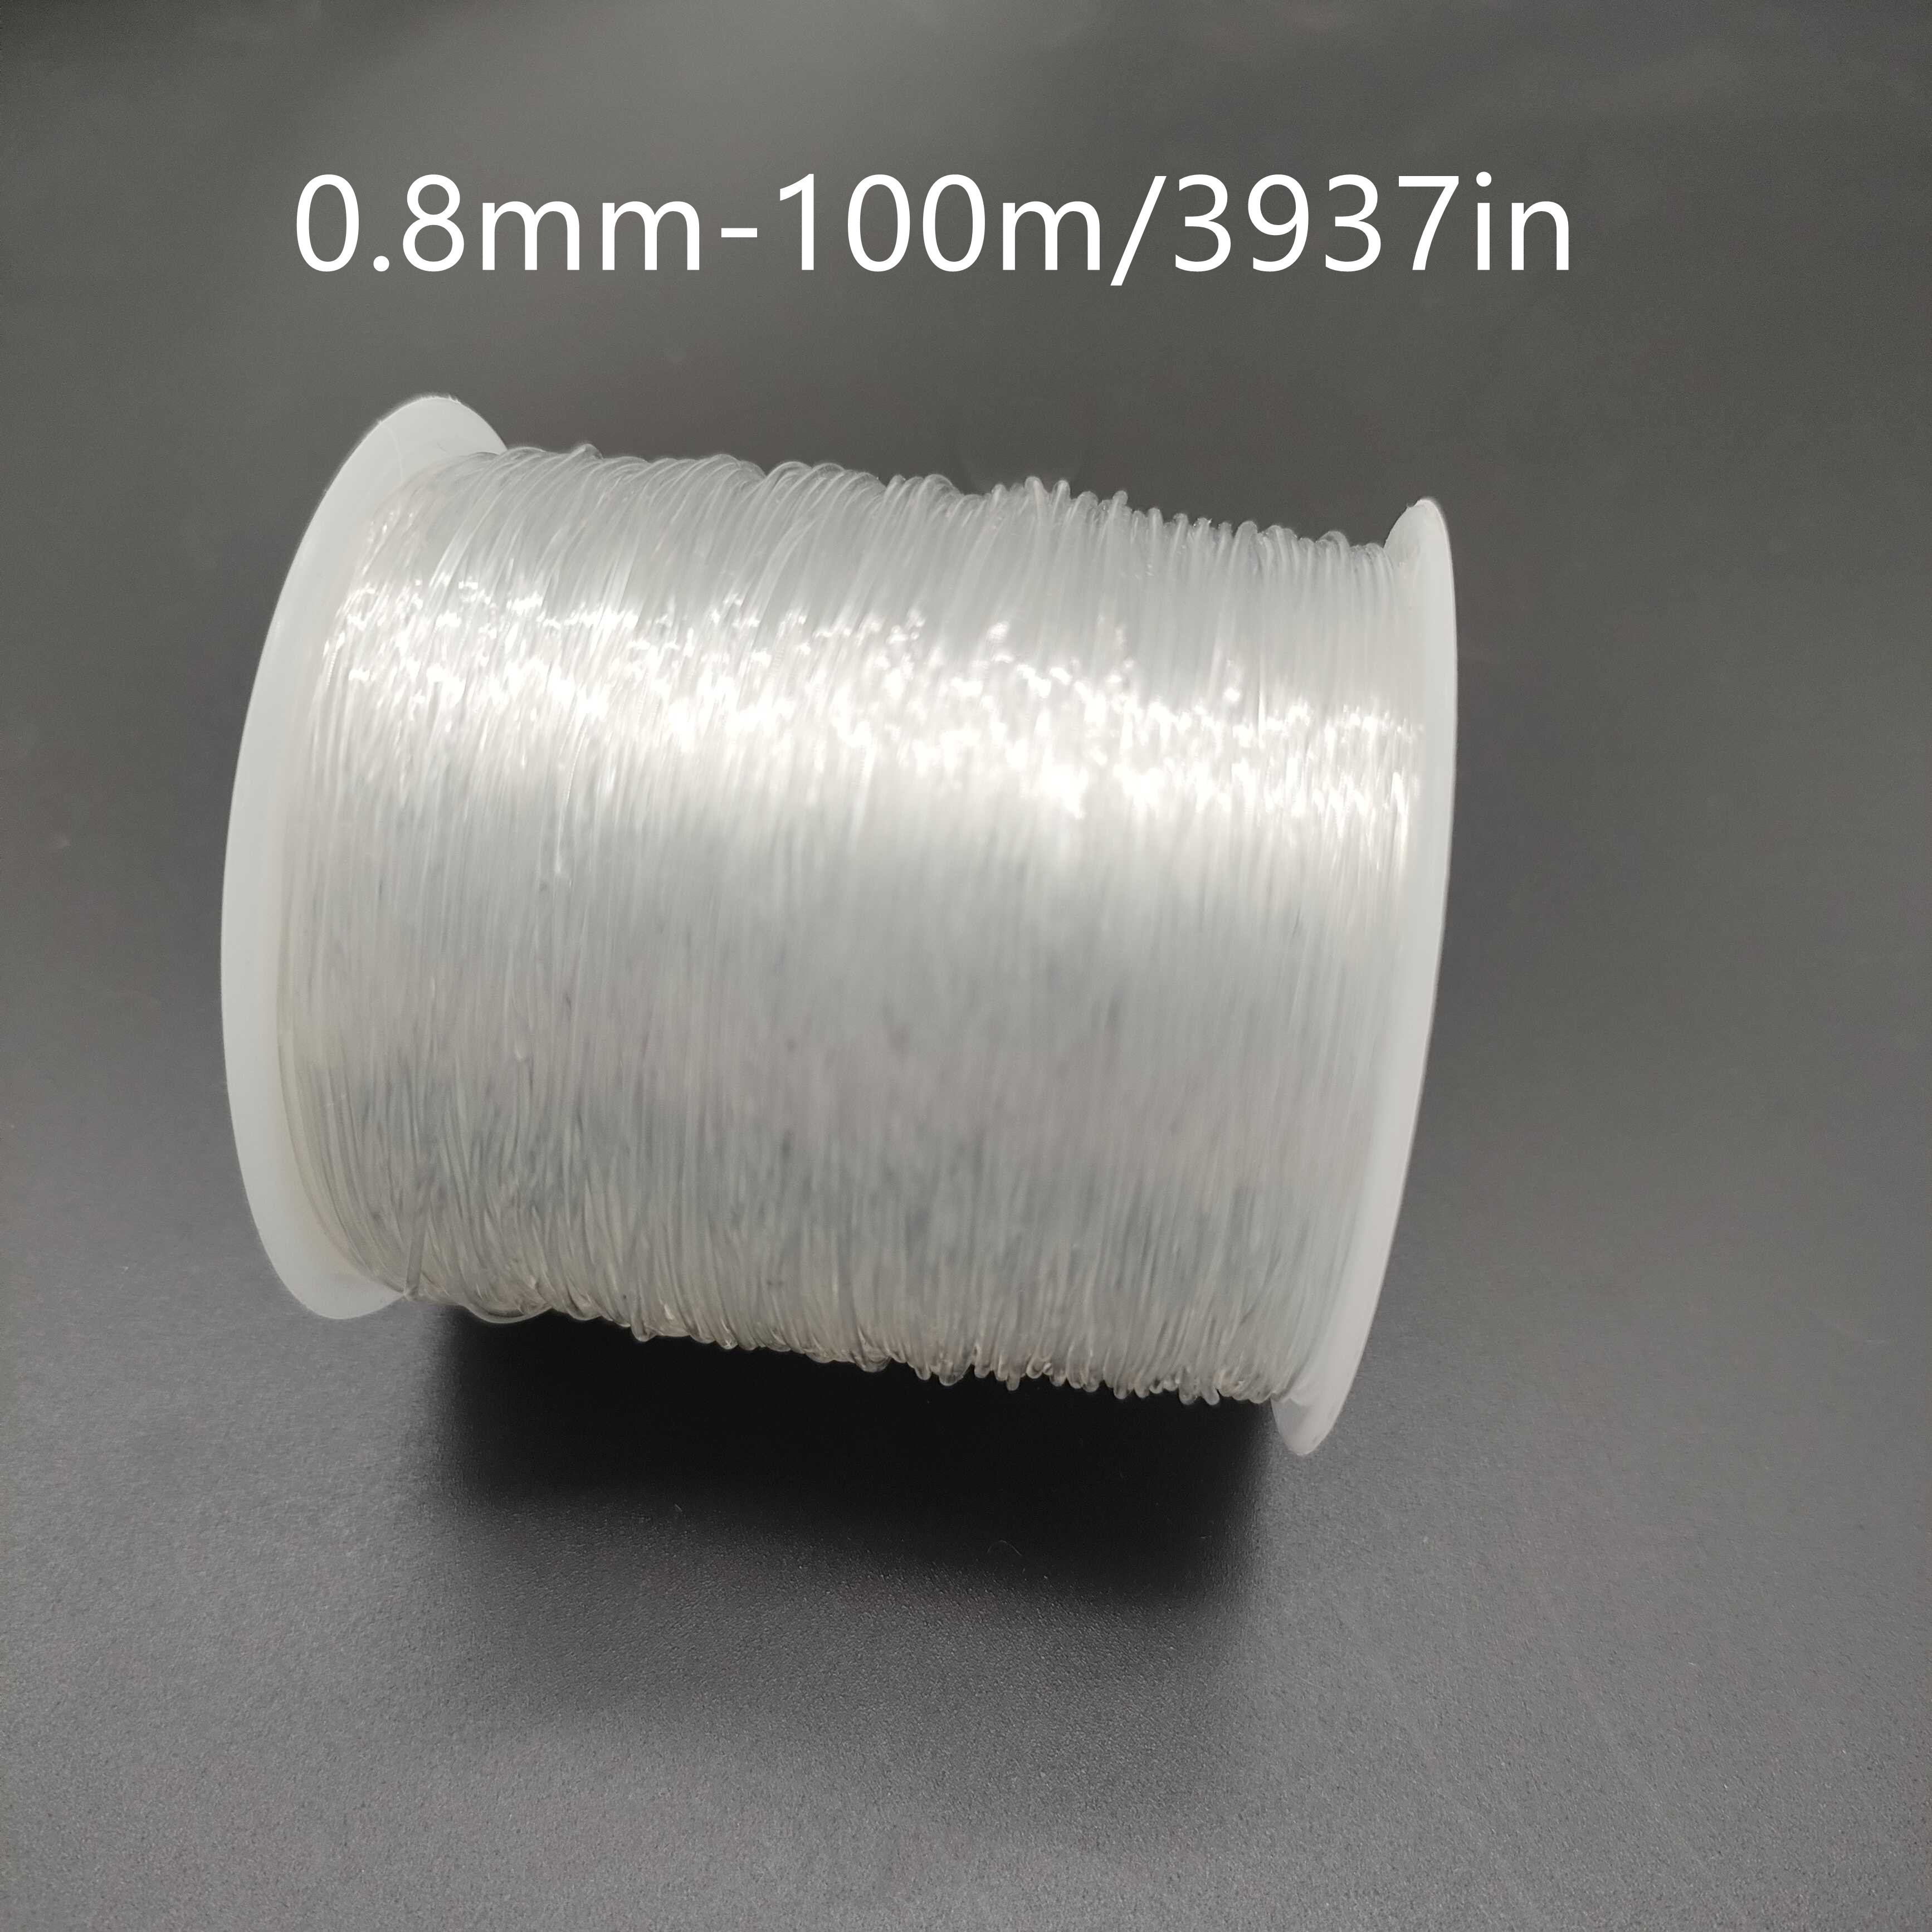 Ymiko Transparent Fishing Wire, Professional Design Excellent Material Jewelry Beading Wire Superior Performance Wear Resistant For Hand Made Works 0.